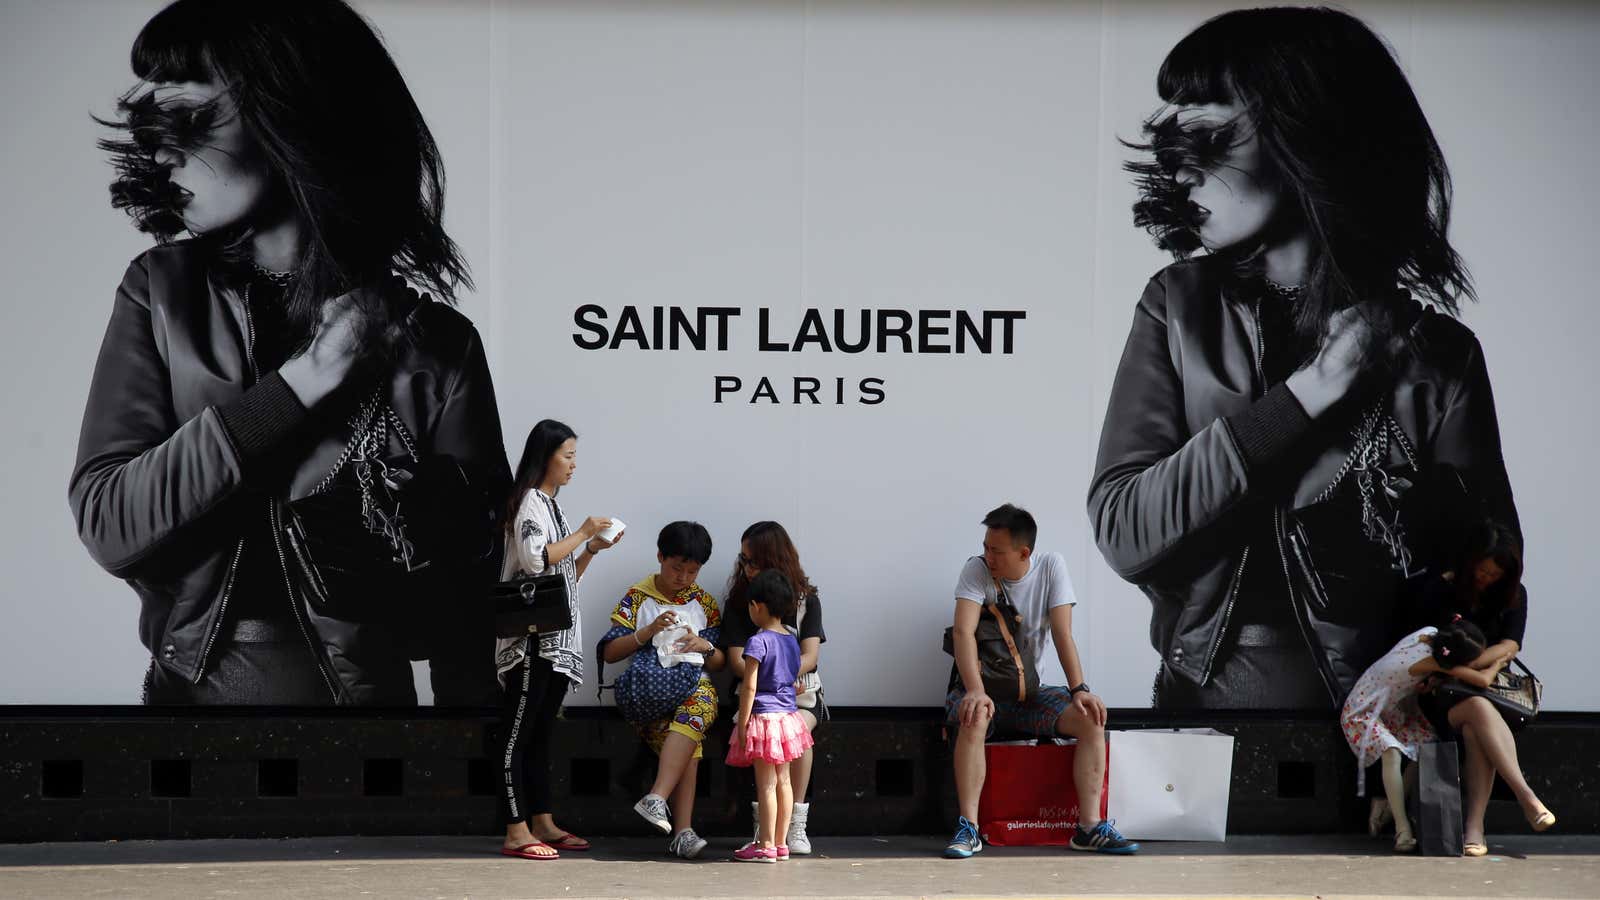 Not everyone thinks the hassle of getting a biometric visa is worth it for a shopping trip to Saint Laurent’s Paris store.